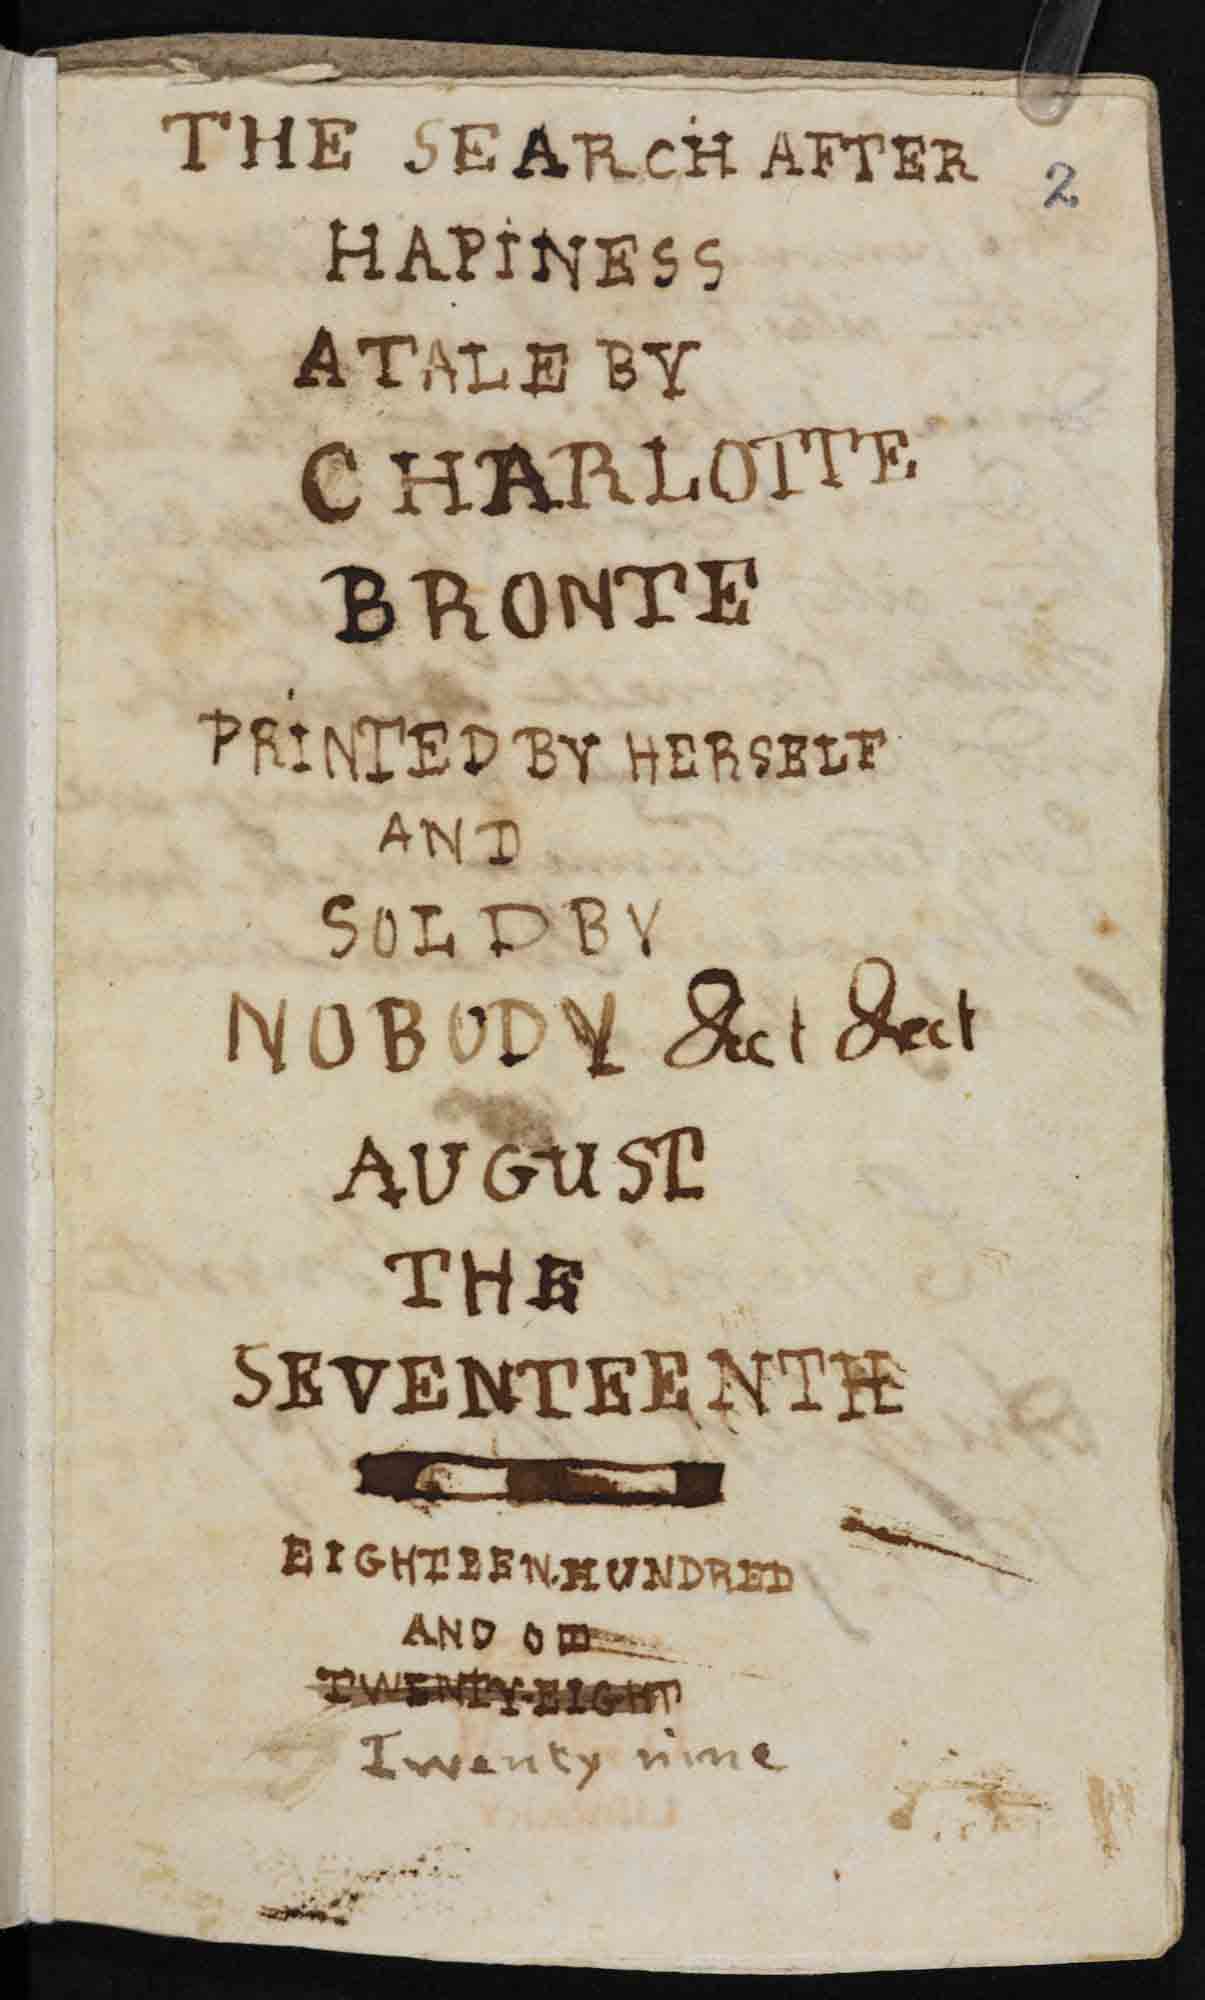 The Search After Happiness manuscript by Charlotte Bronte